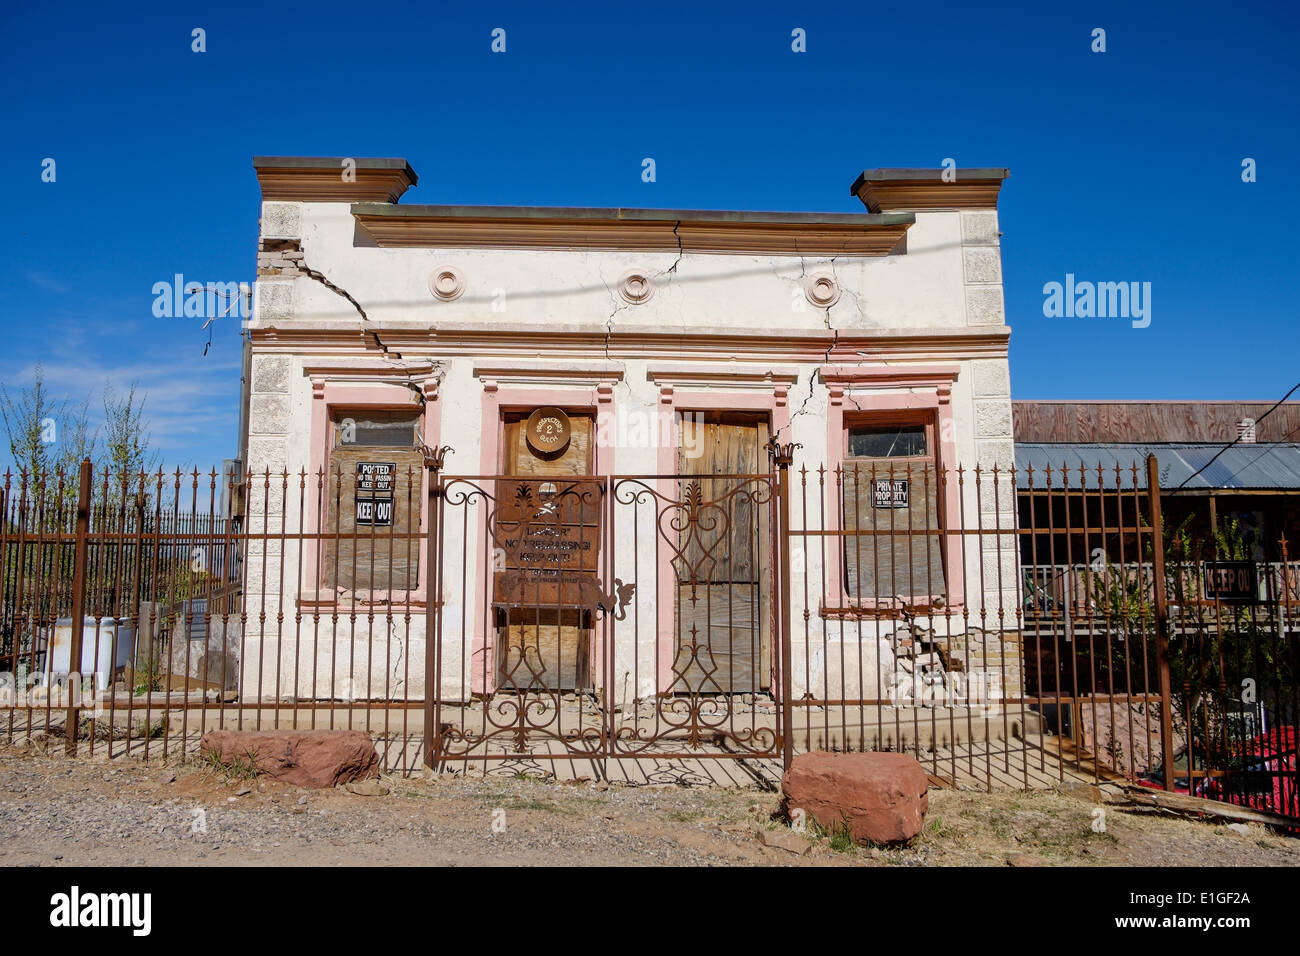 The old abandoned Cuban Queen bordello building in the historic mining town of Jerome, Arizona, USA. Stock Photo